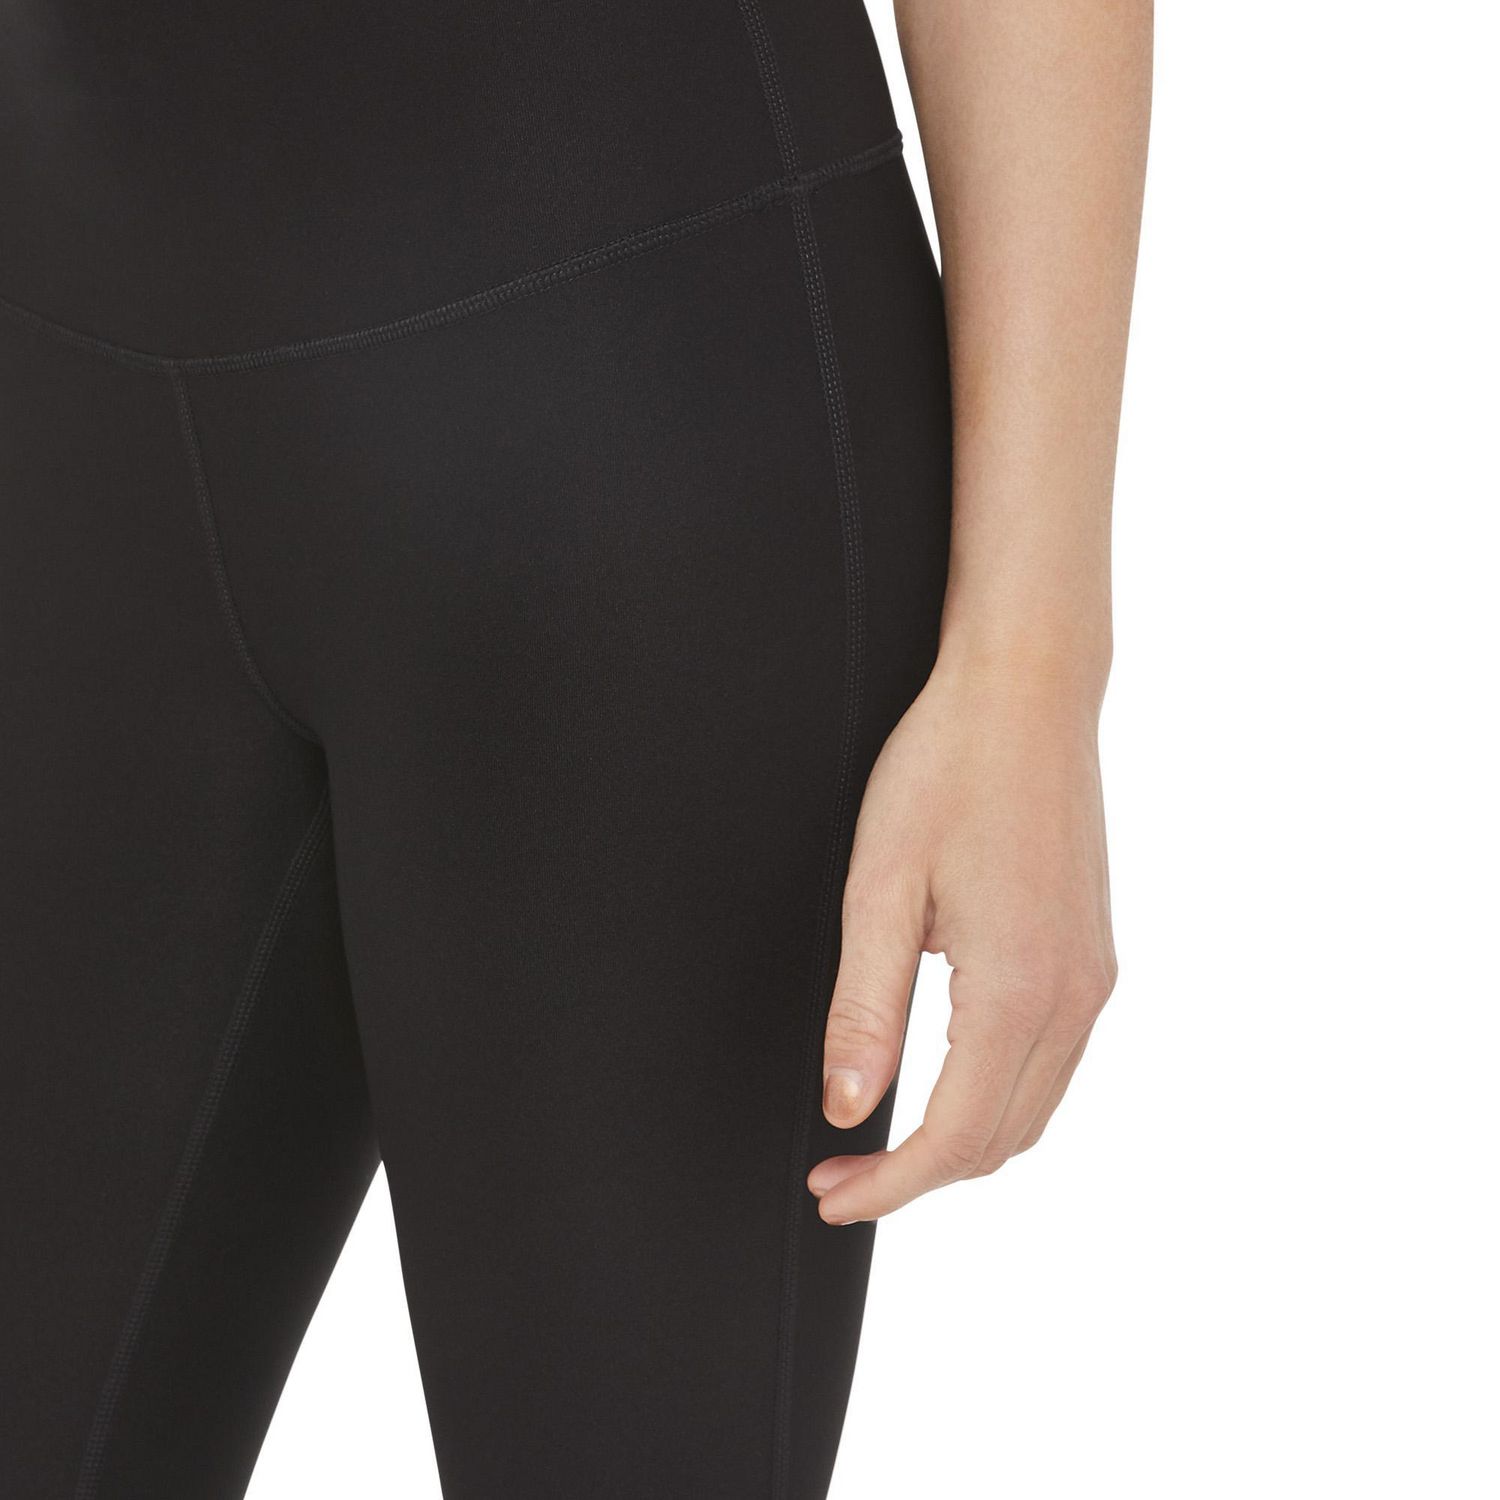 Athletic Works Women's Activewear On Sale Up To 90% Off Retail